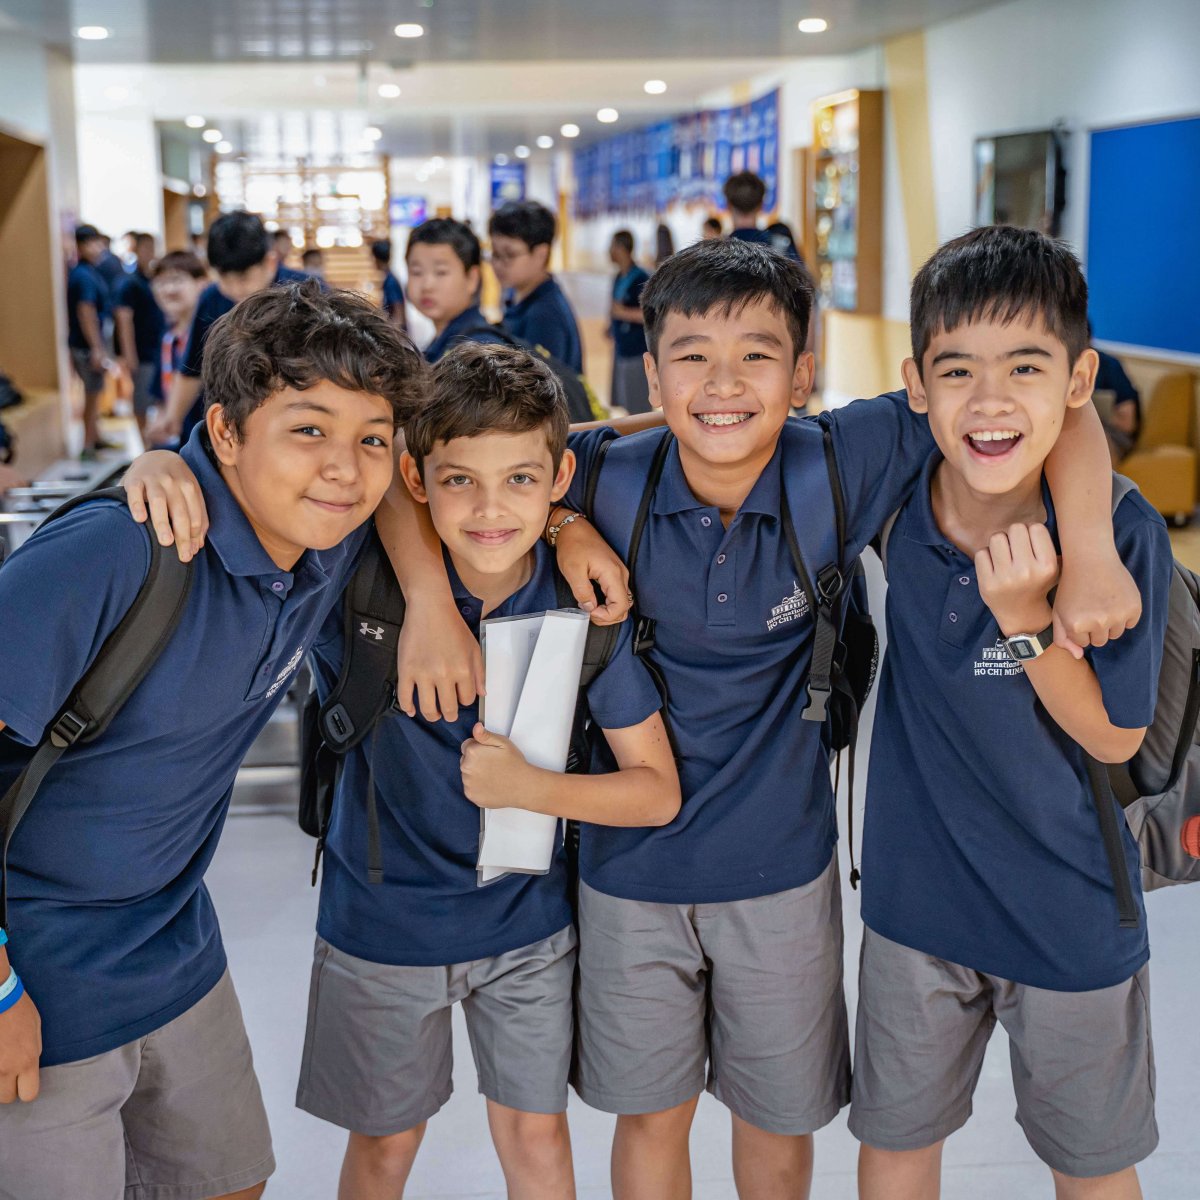 Four middle school students smiling in the school halls